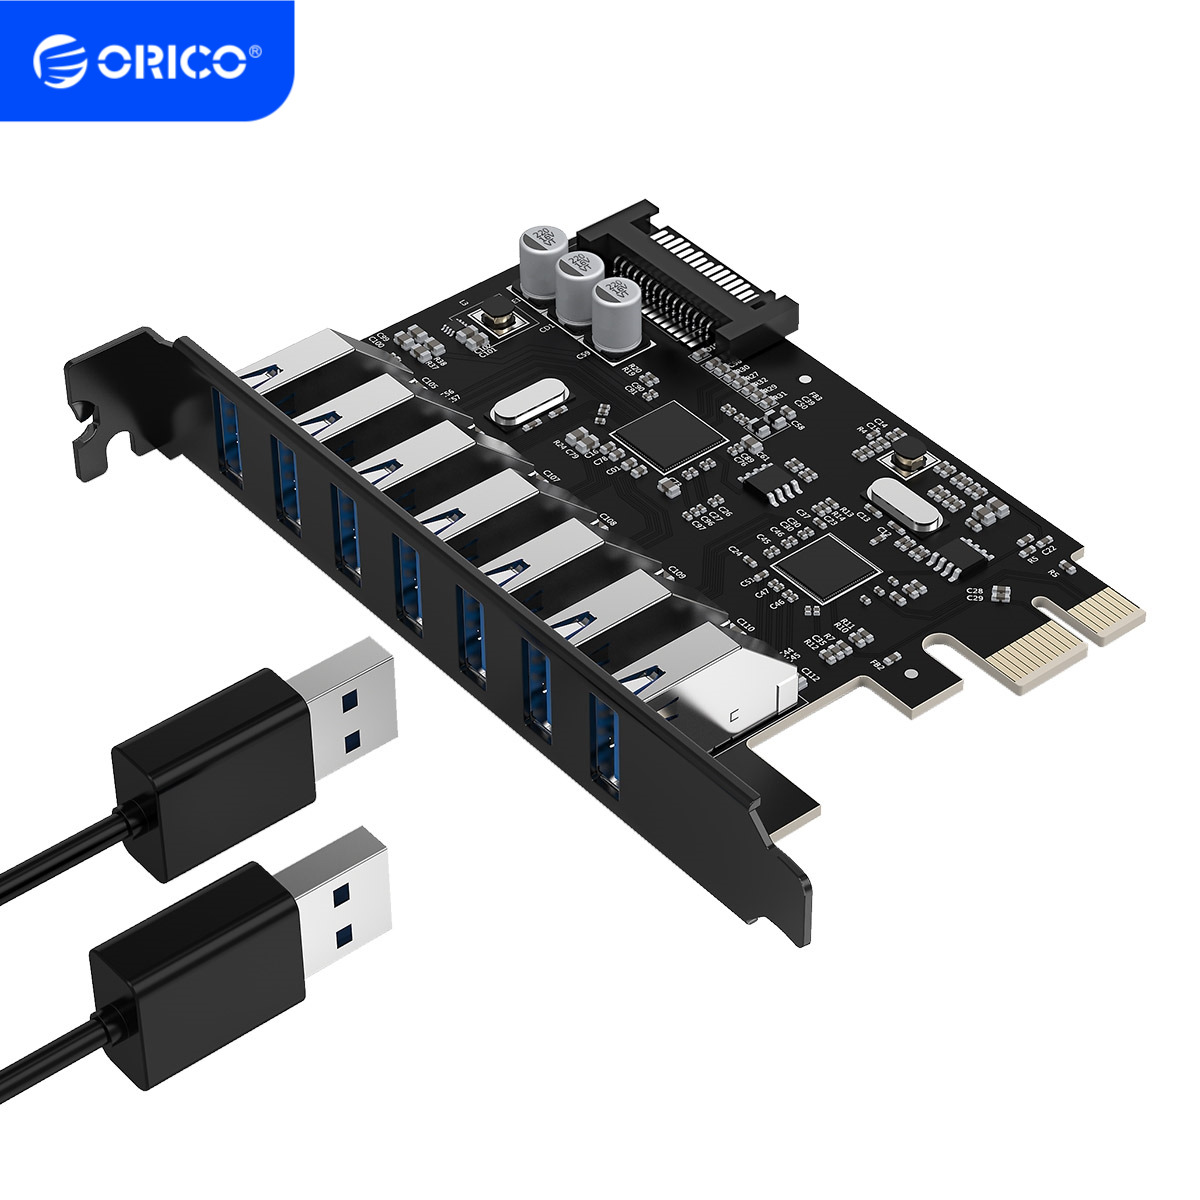 ORICO 7Port SS USB3.0 5Gbps PCI-E Express card with a 15pin SATA power connector